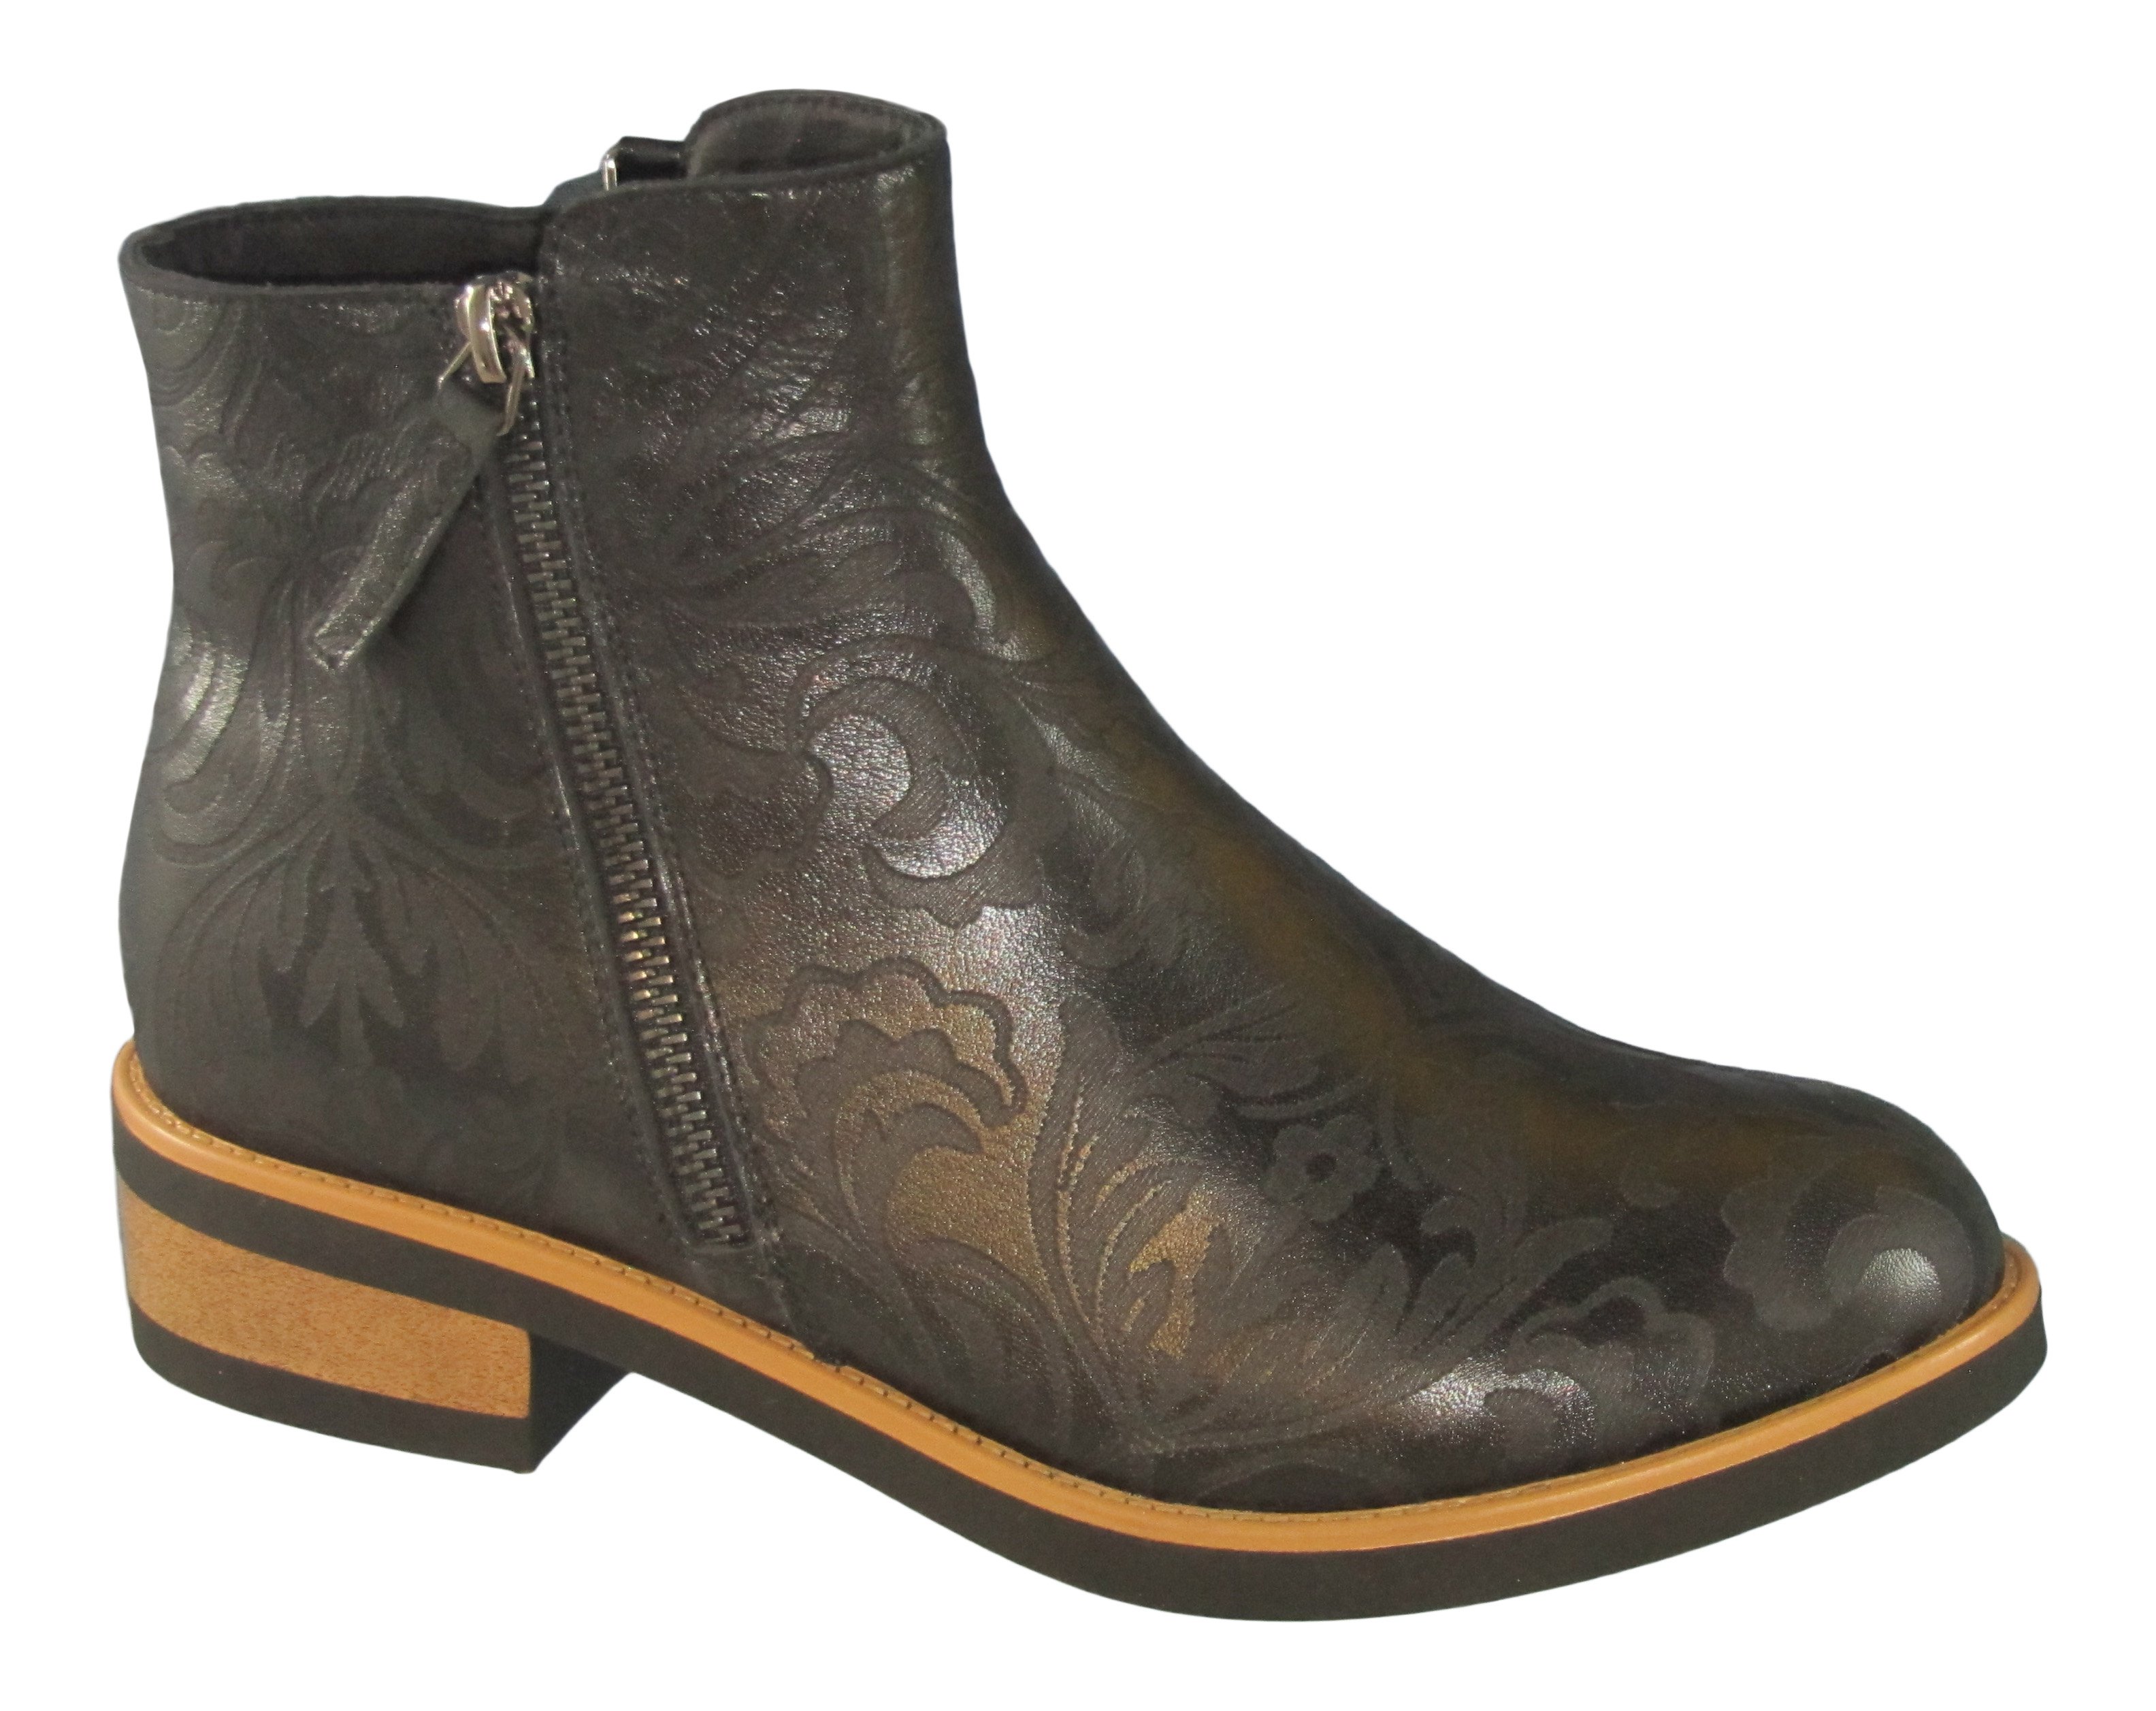 bresley ankle boots